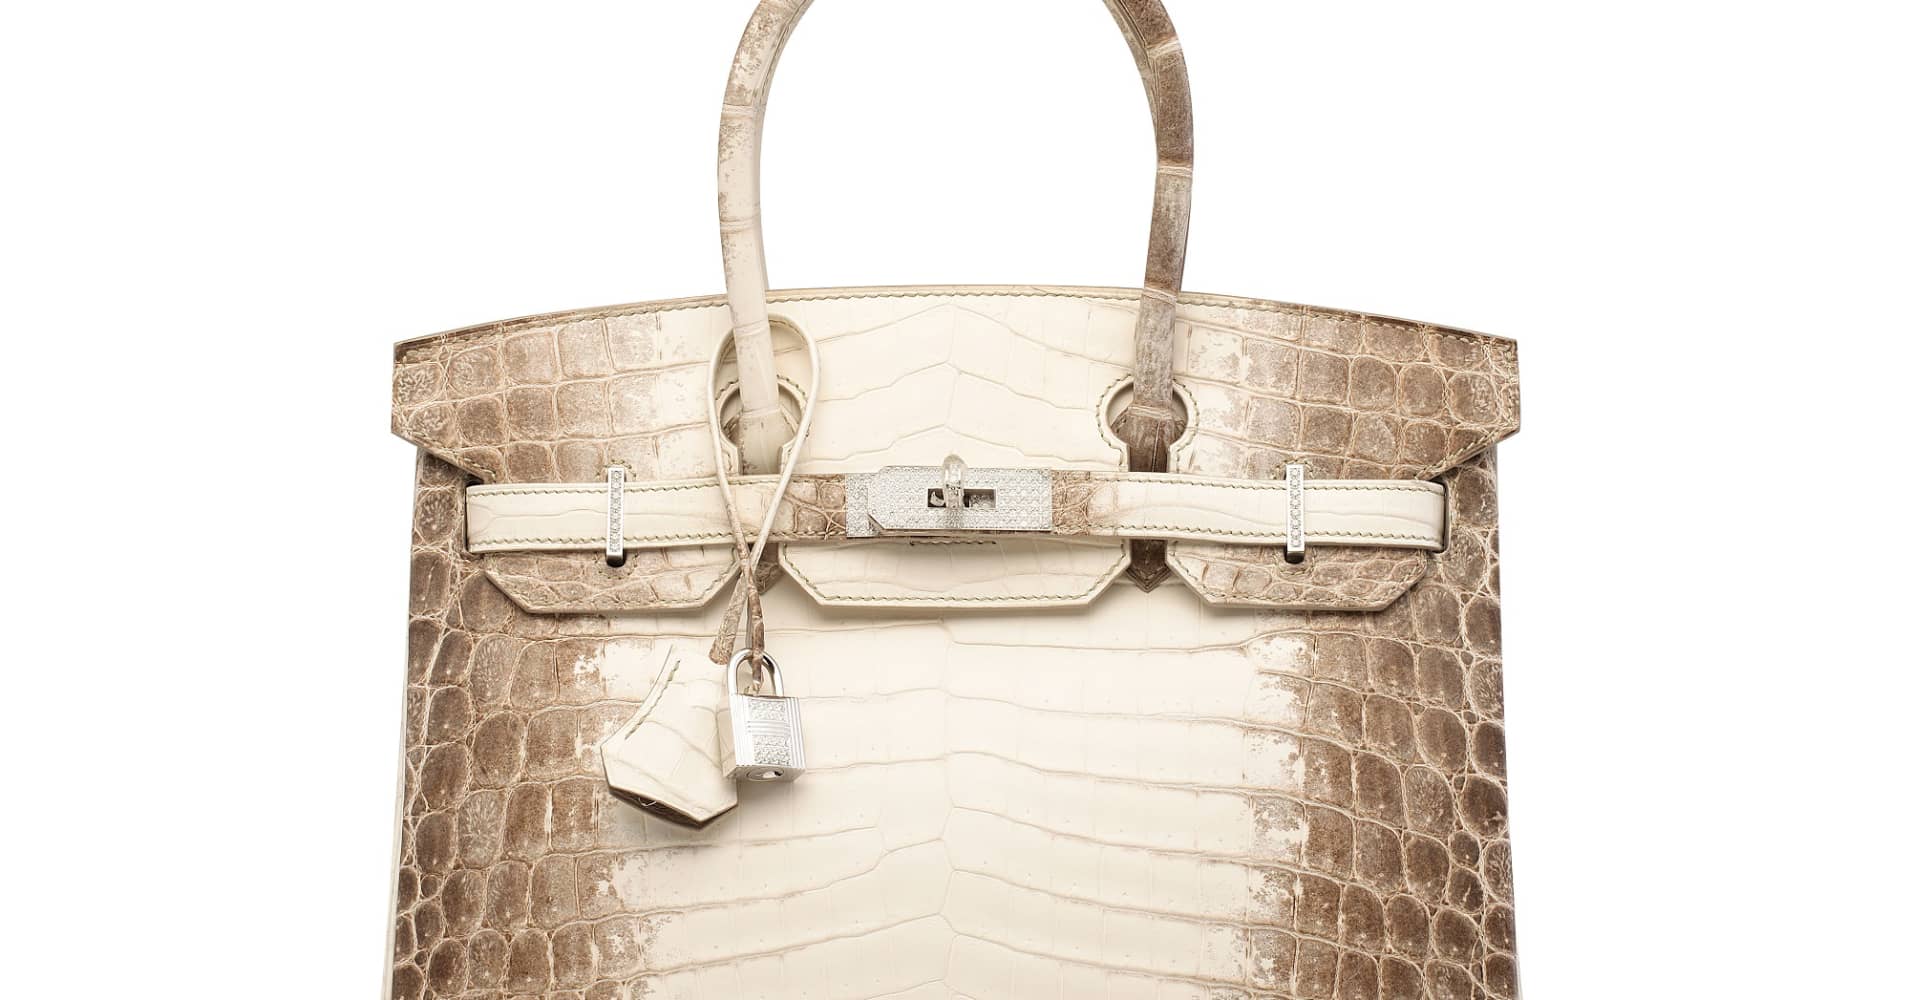 This $379,261 Hermes Birkin handbag is the most expensive ever sold